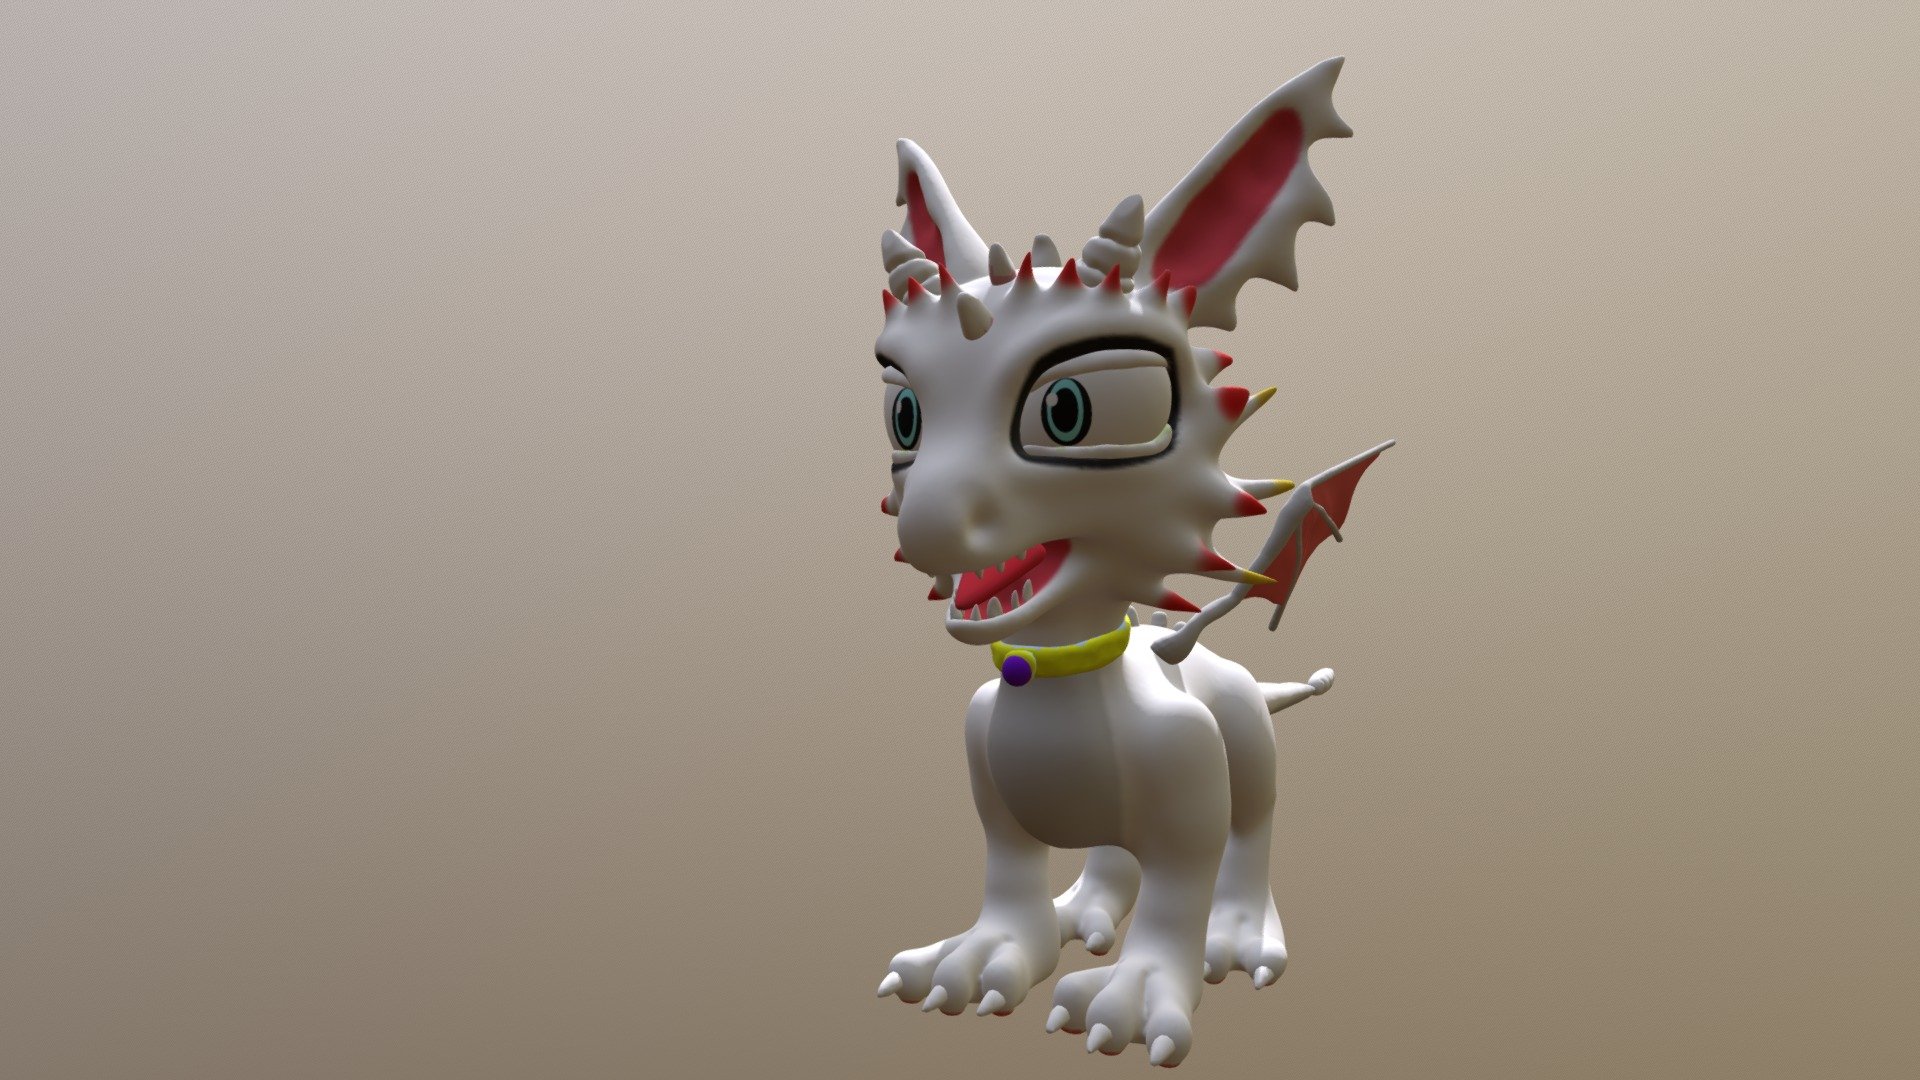 Dragon Cartoon Cgi Concept
Create use zbrush and ispirate reference found online - Dragon Cartoon Cgi Concept - Download Free 3D model by xeratdragons (@dragonights91) 3d model